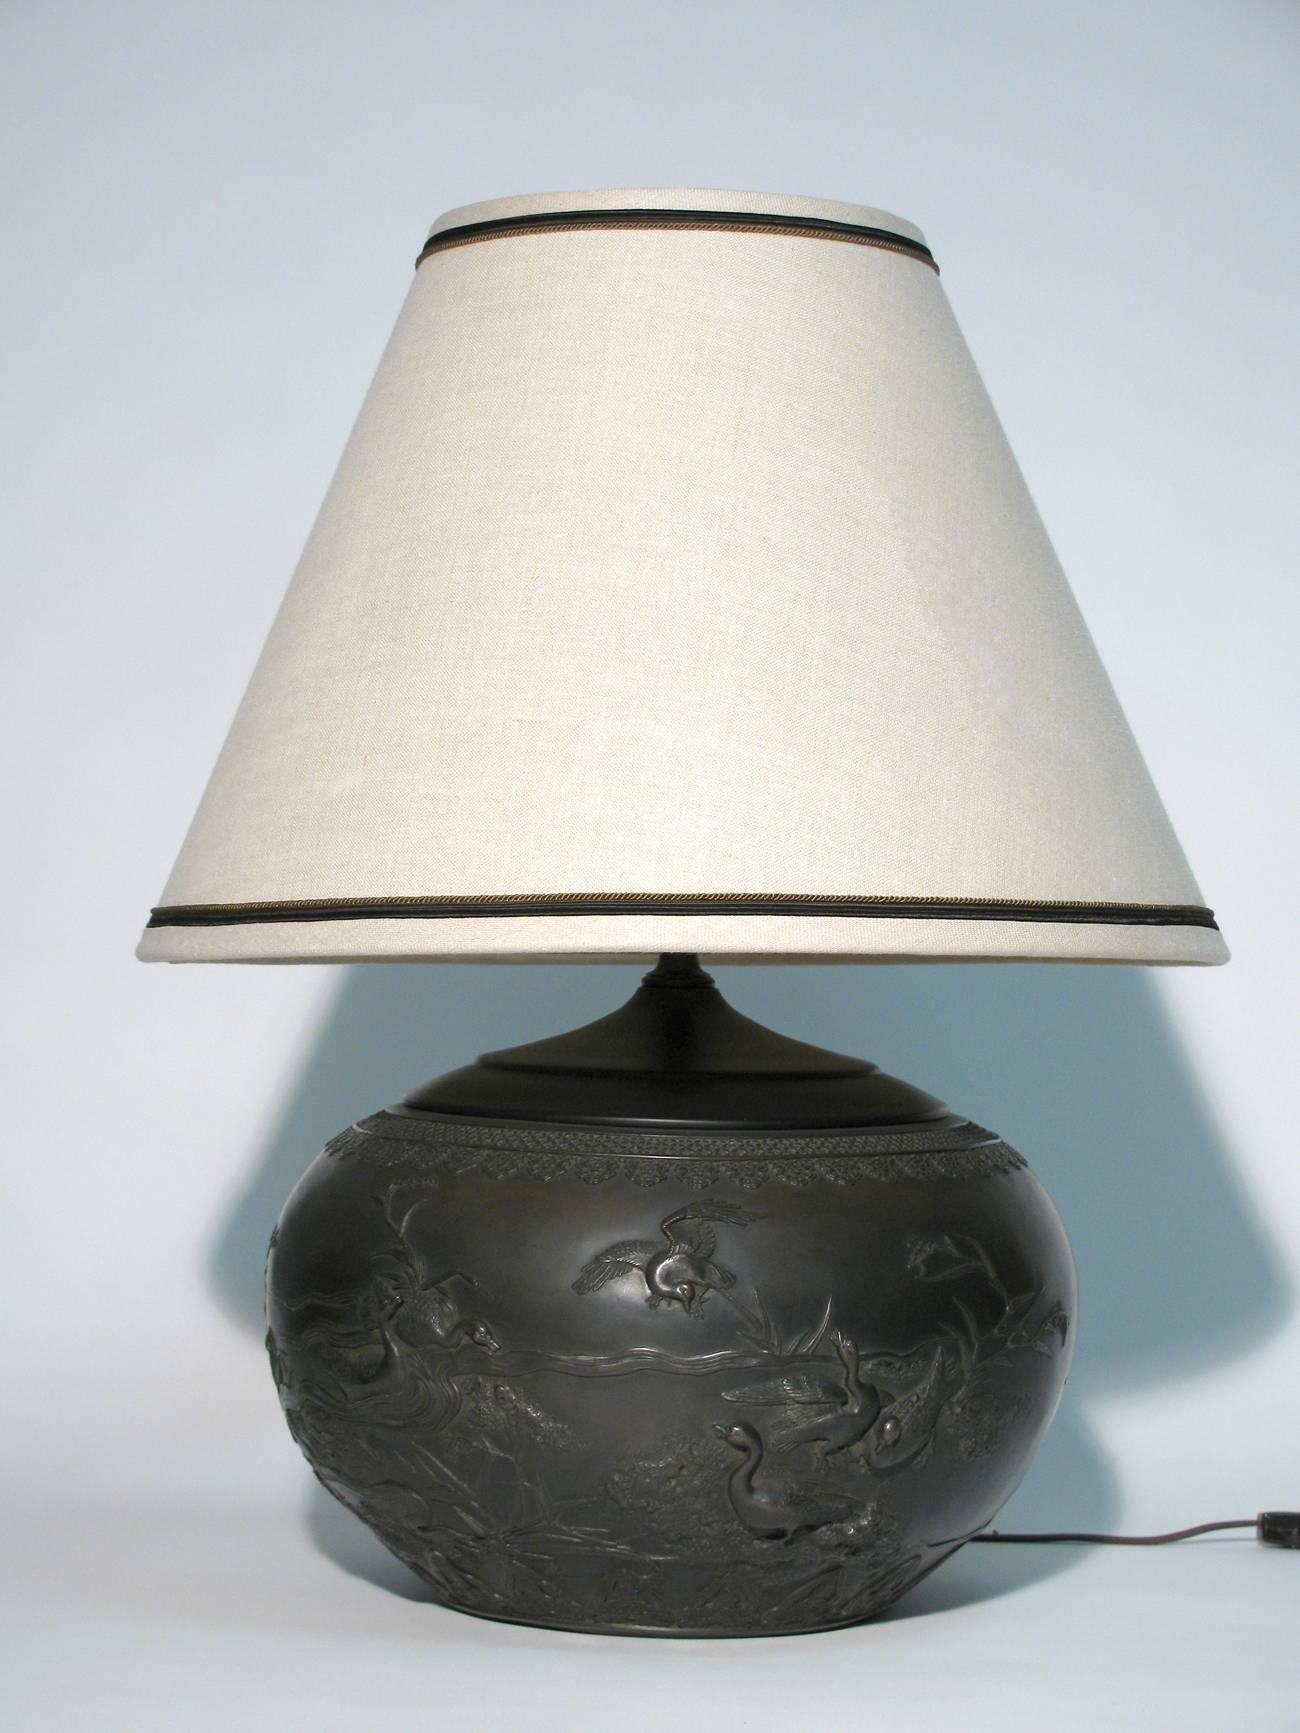 A stunning pair of heavy table lamps in the chinoiserie taste. The lamps are a rich brown ceramic and have the look of dark patina bronze, boubous in form and have blackened metal caps on top. Single socket with three-way switch. Measures: Height